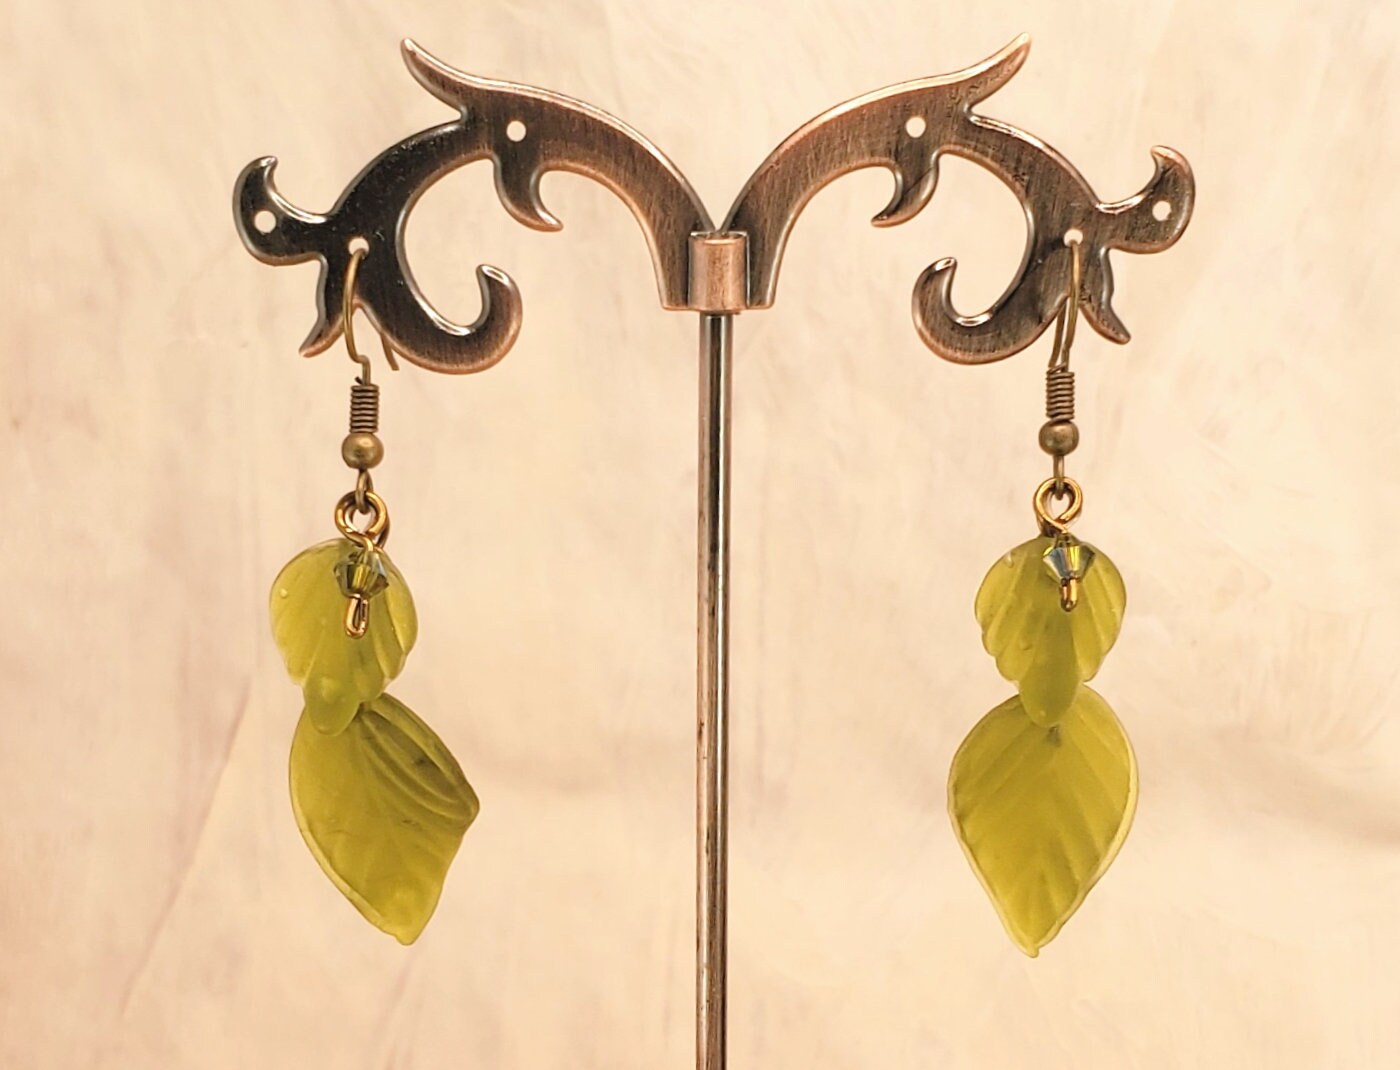 Double Glass Leaf Earrings in Olive Green, Wedding, Bridesmaid, Art Nouveau, Renaissance, Belle Epoque, Forest, Choice of Closure Types